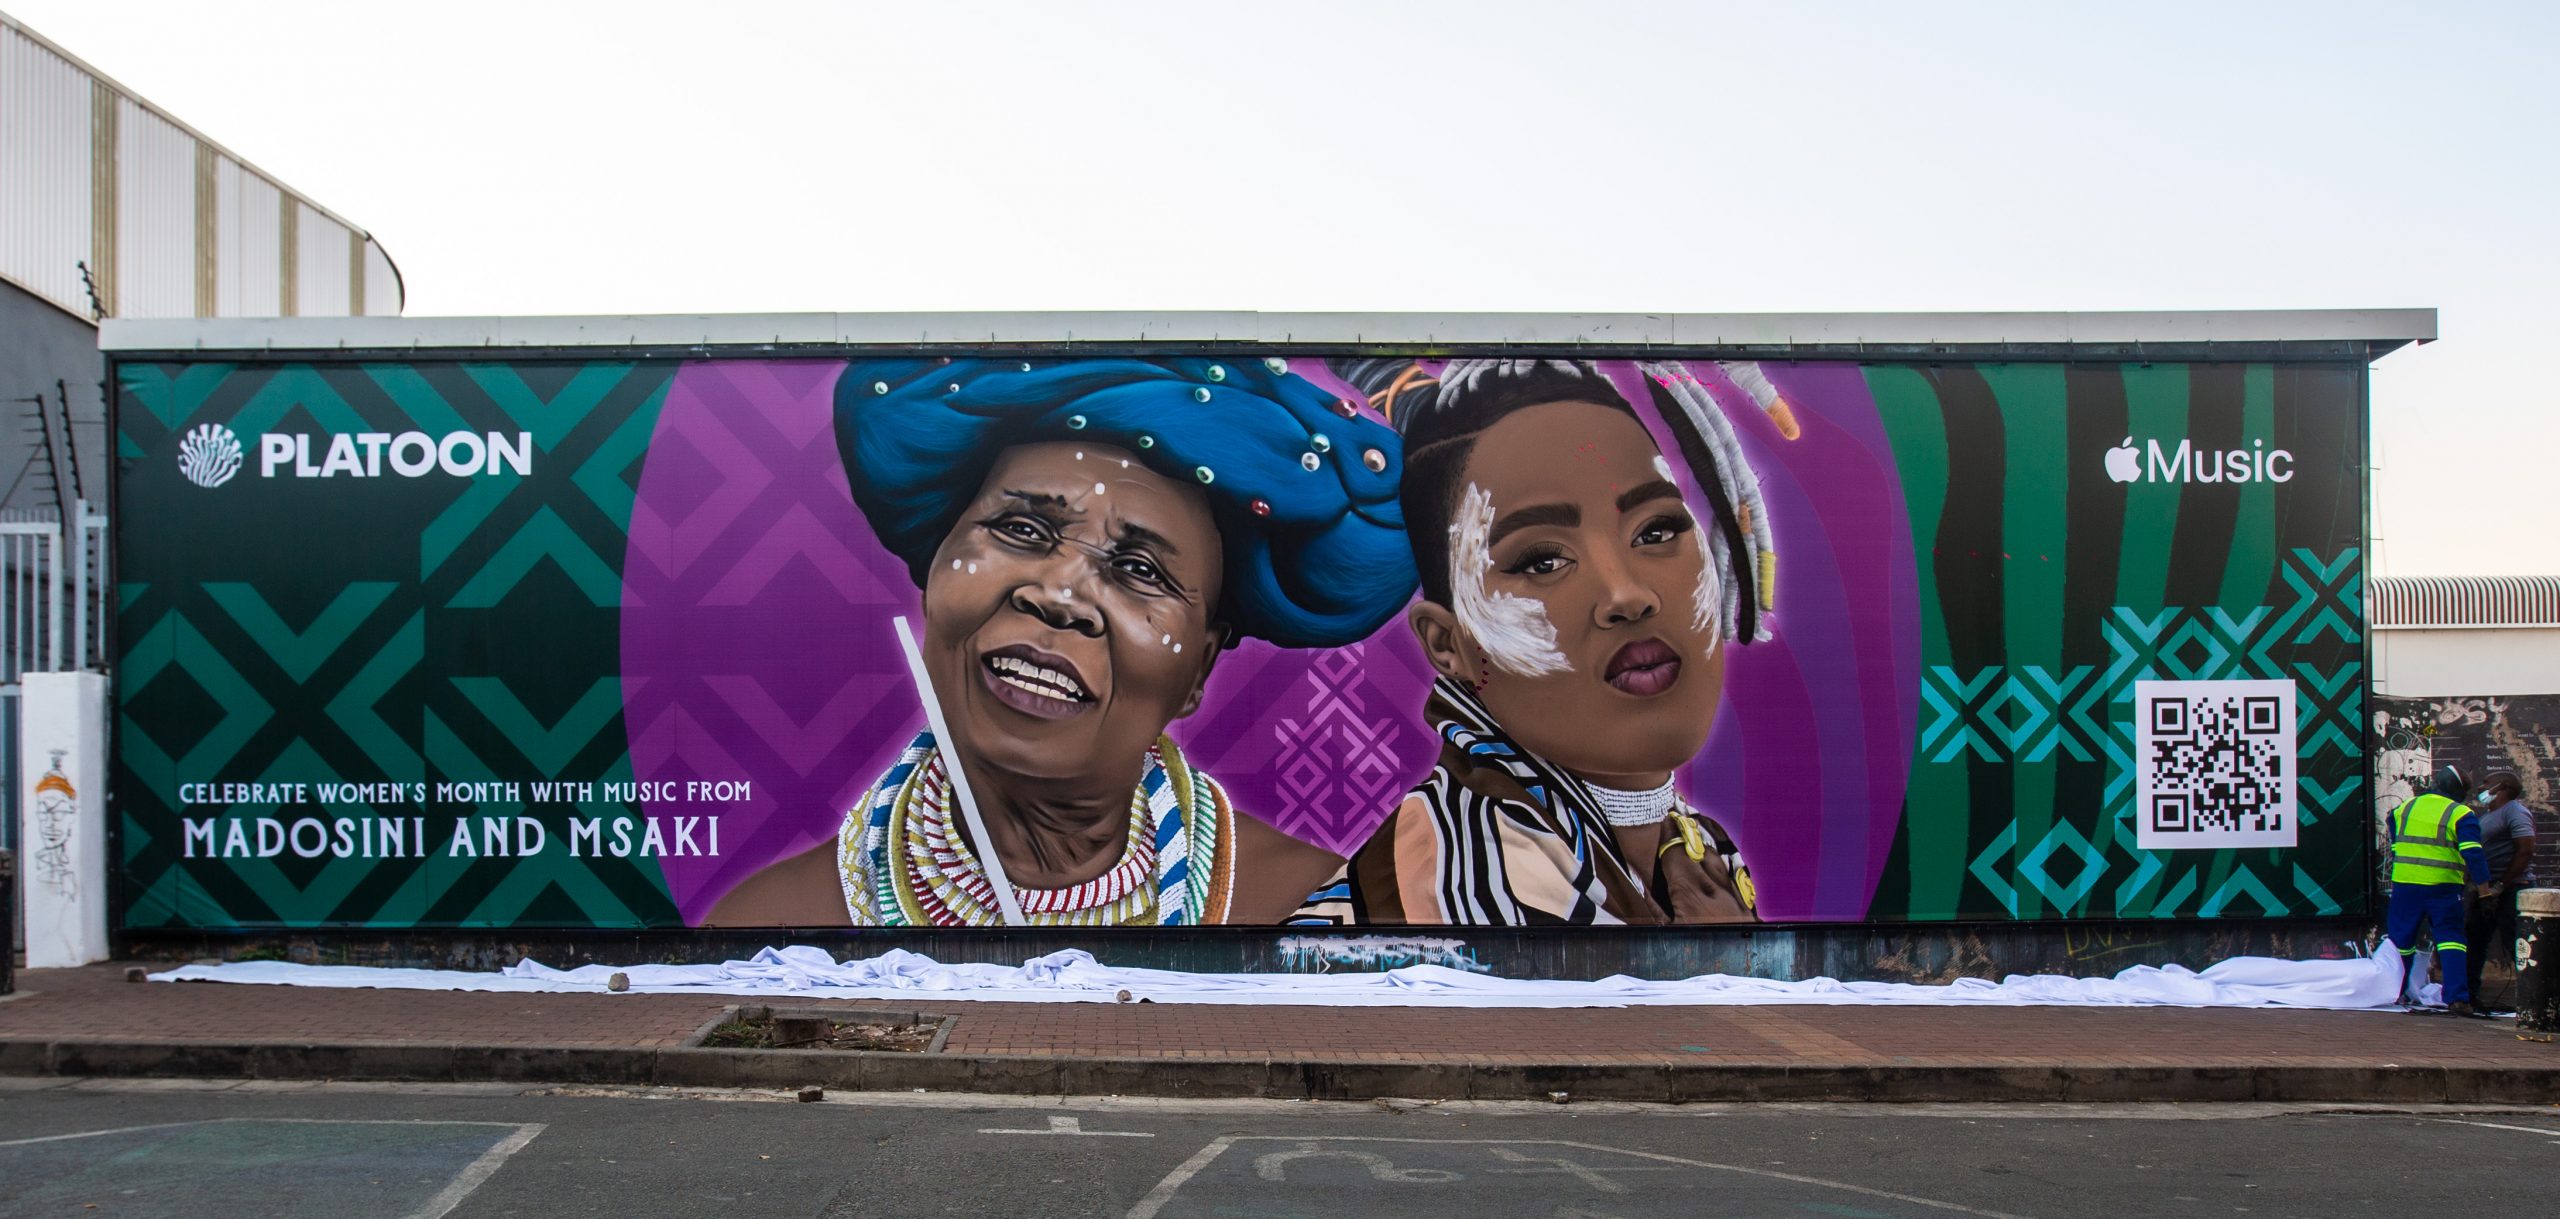  Baz-Art unveils second Women’s Wall mural in Fox Street, Maboneng. Designed and executed by artist Dbongz, the wall features iconic musicians Madosini and Msak